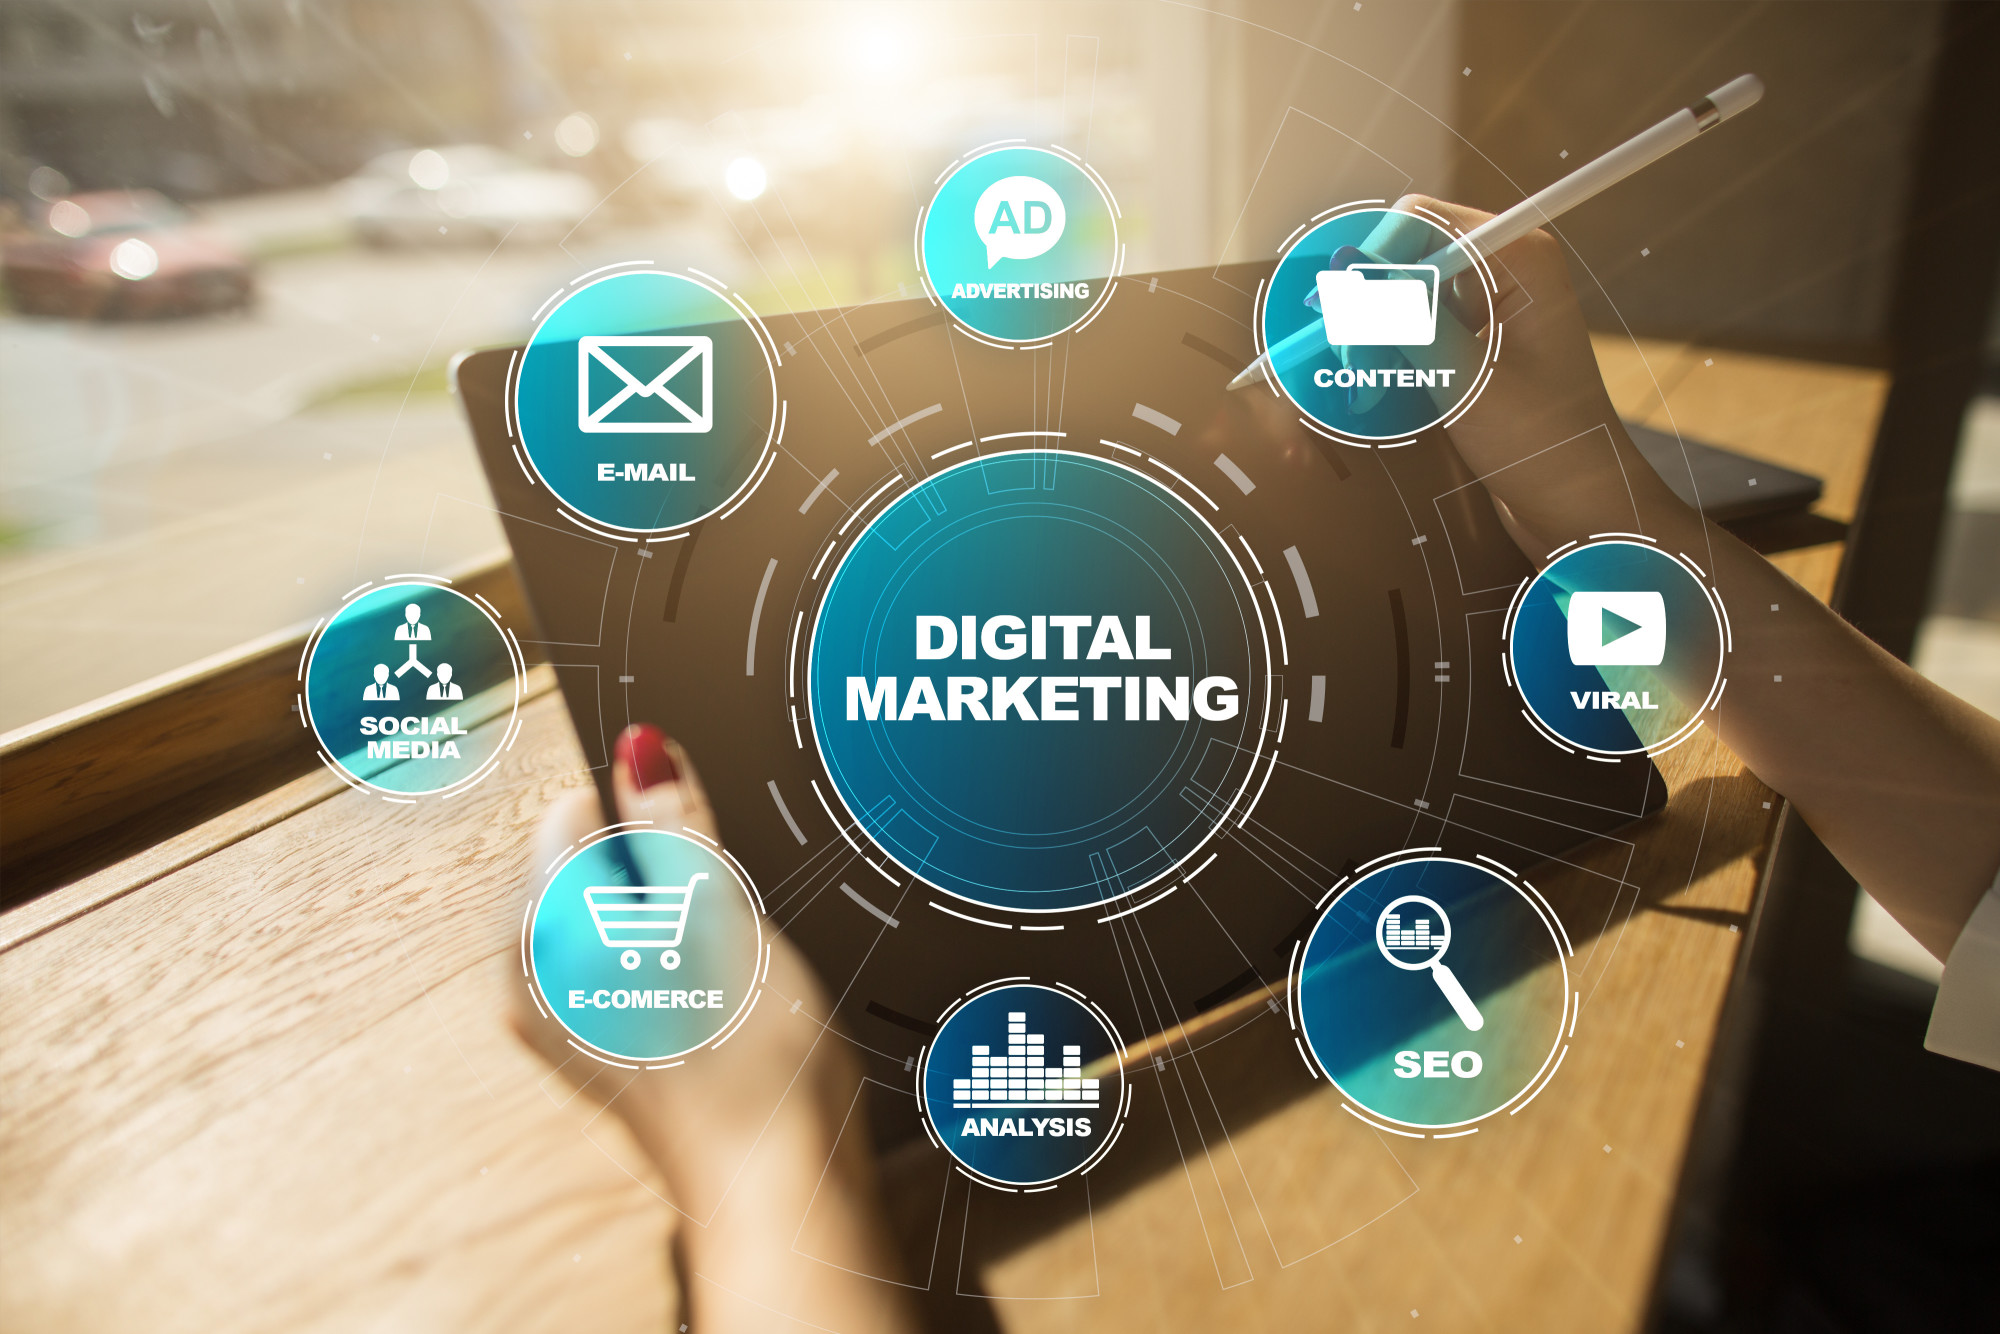 digital marketing and related icons and terms